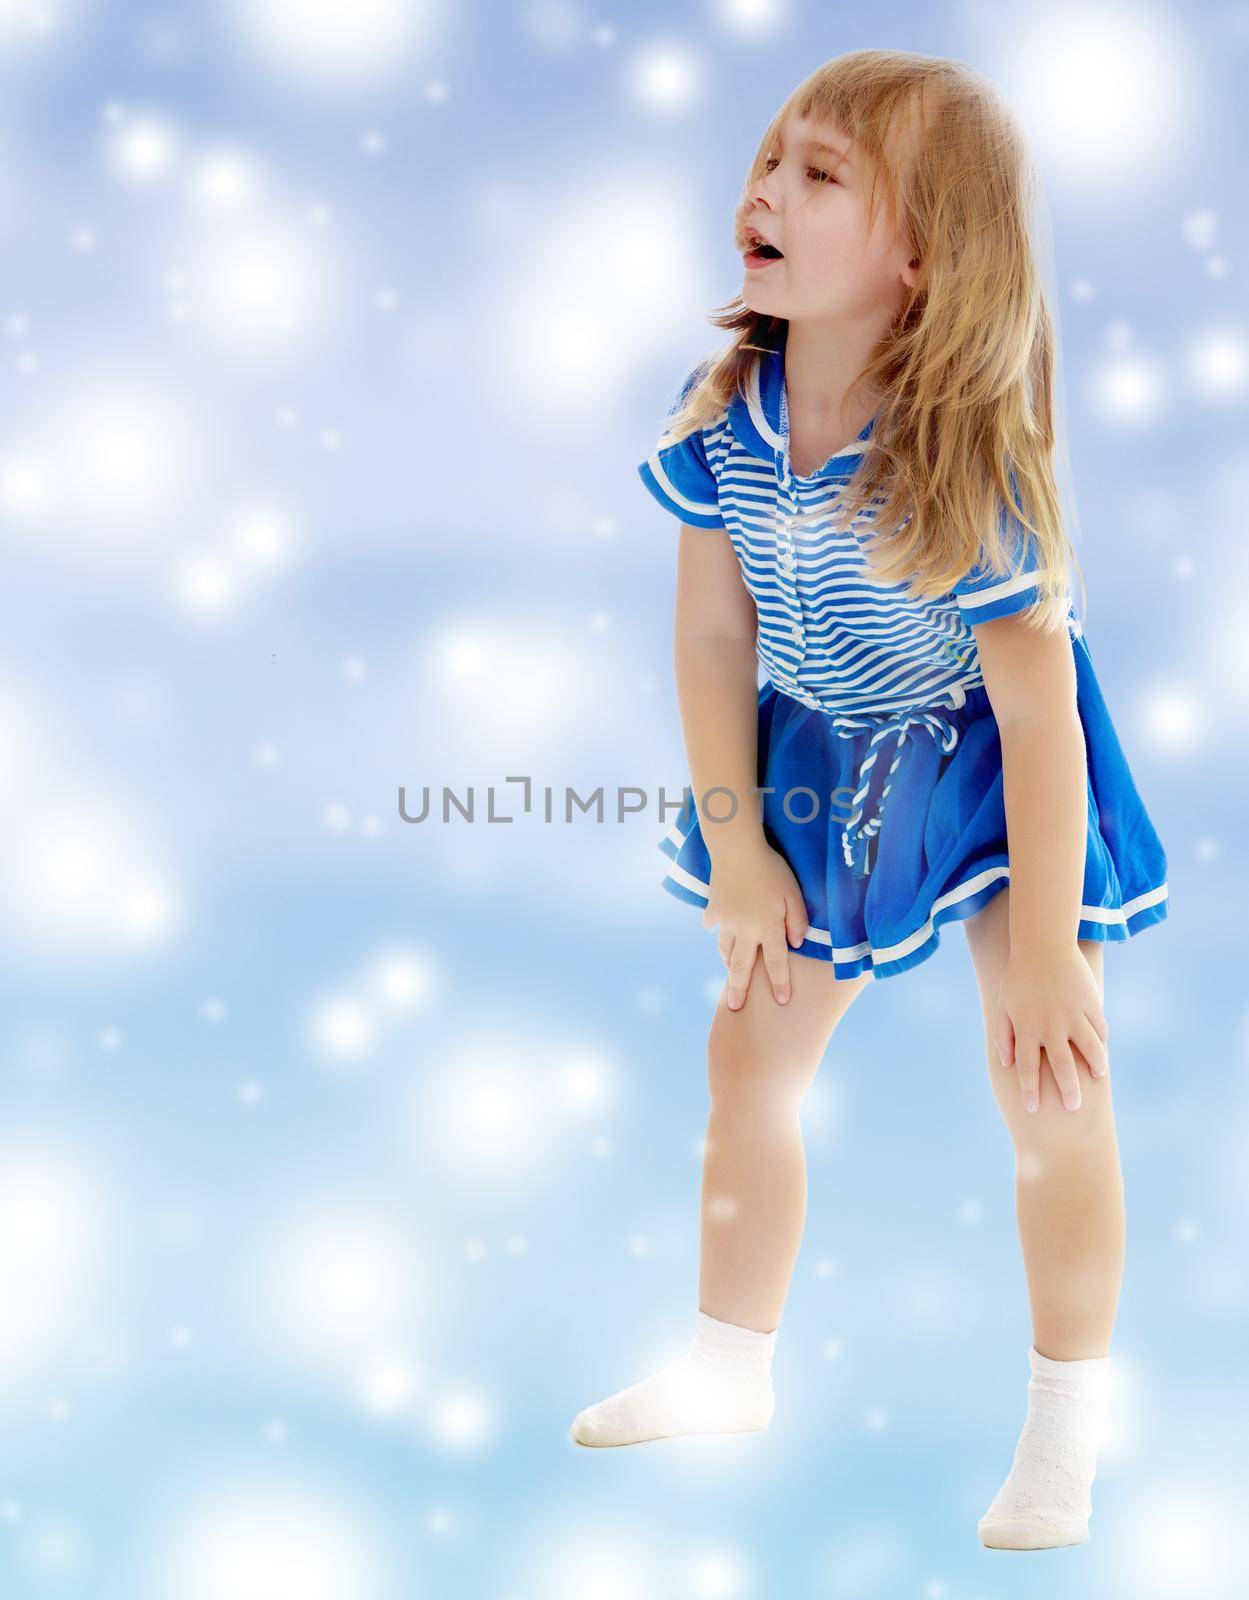 On a blue background with white blurry circles, like Christmas snowflakes. Cute little unkempt girl in a short blue dress. Girl looking to the side with his hands on his knees.